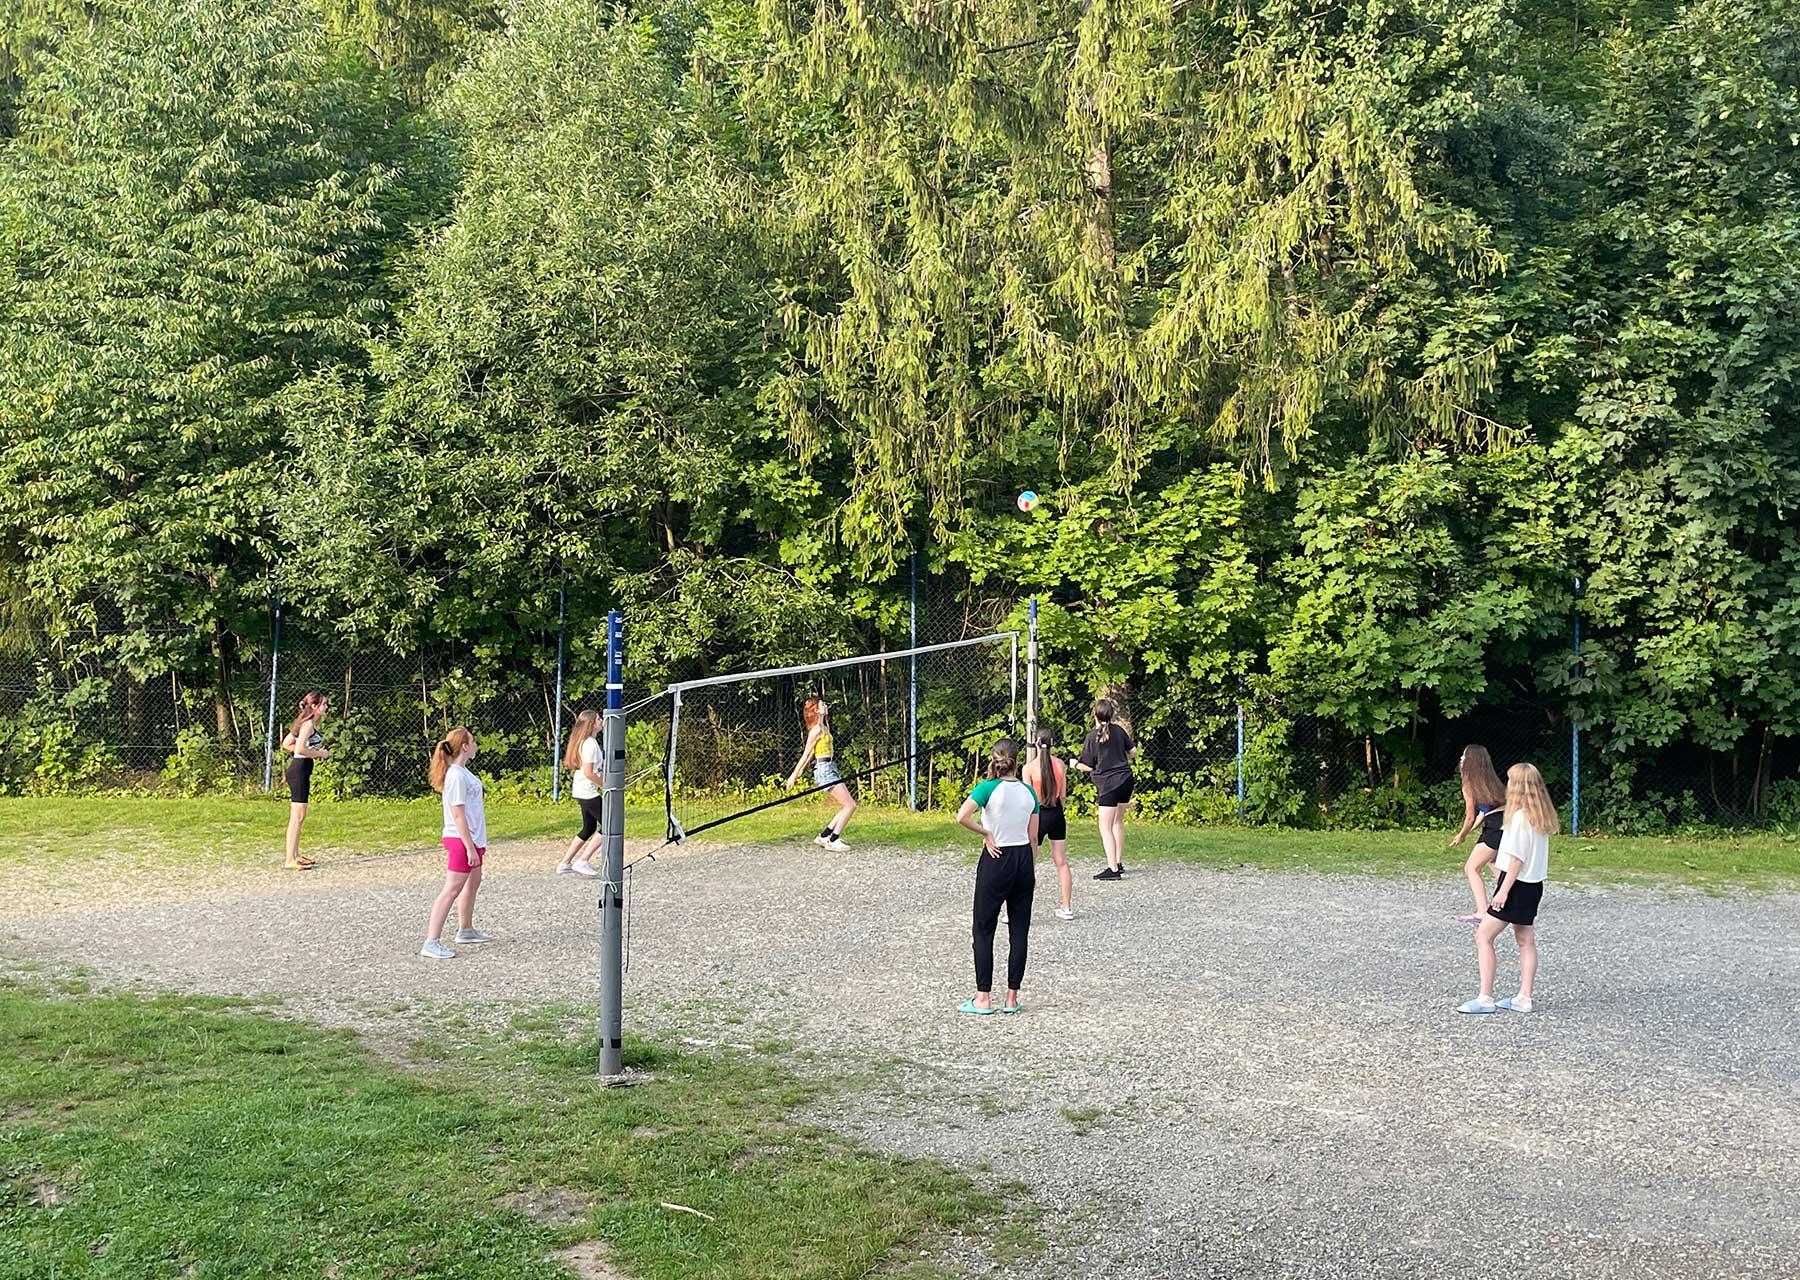 Games and physical activity were an important part of the program. Photo:LWF Poland